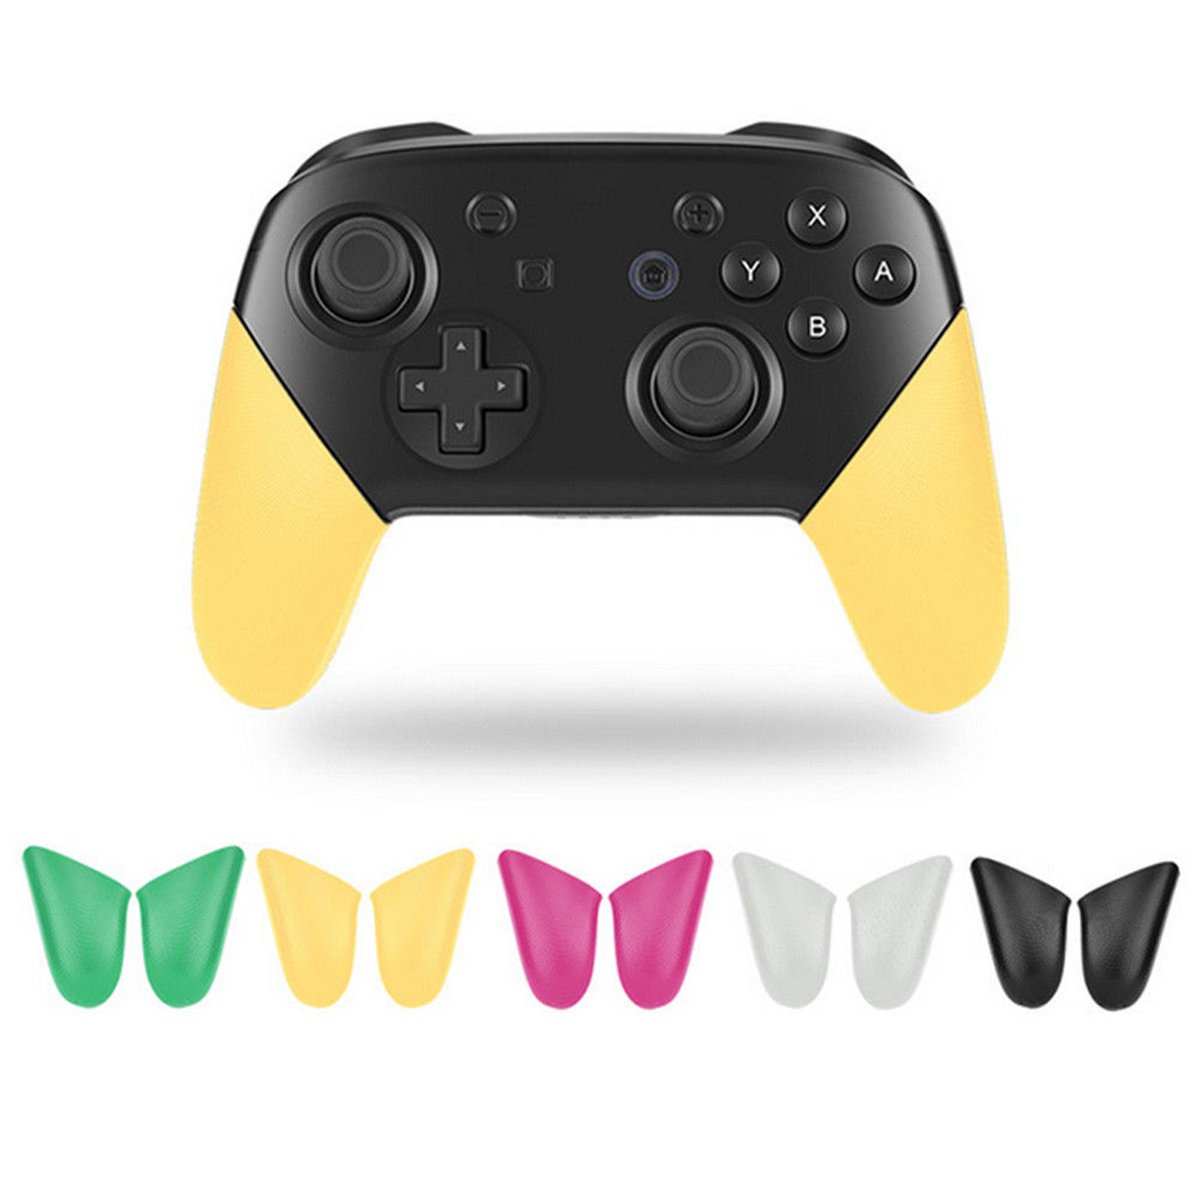 Replacement Grip Handle Protection Solid Shell Skidproof Holder For Nintendo Switch Pro Gamepad Controller